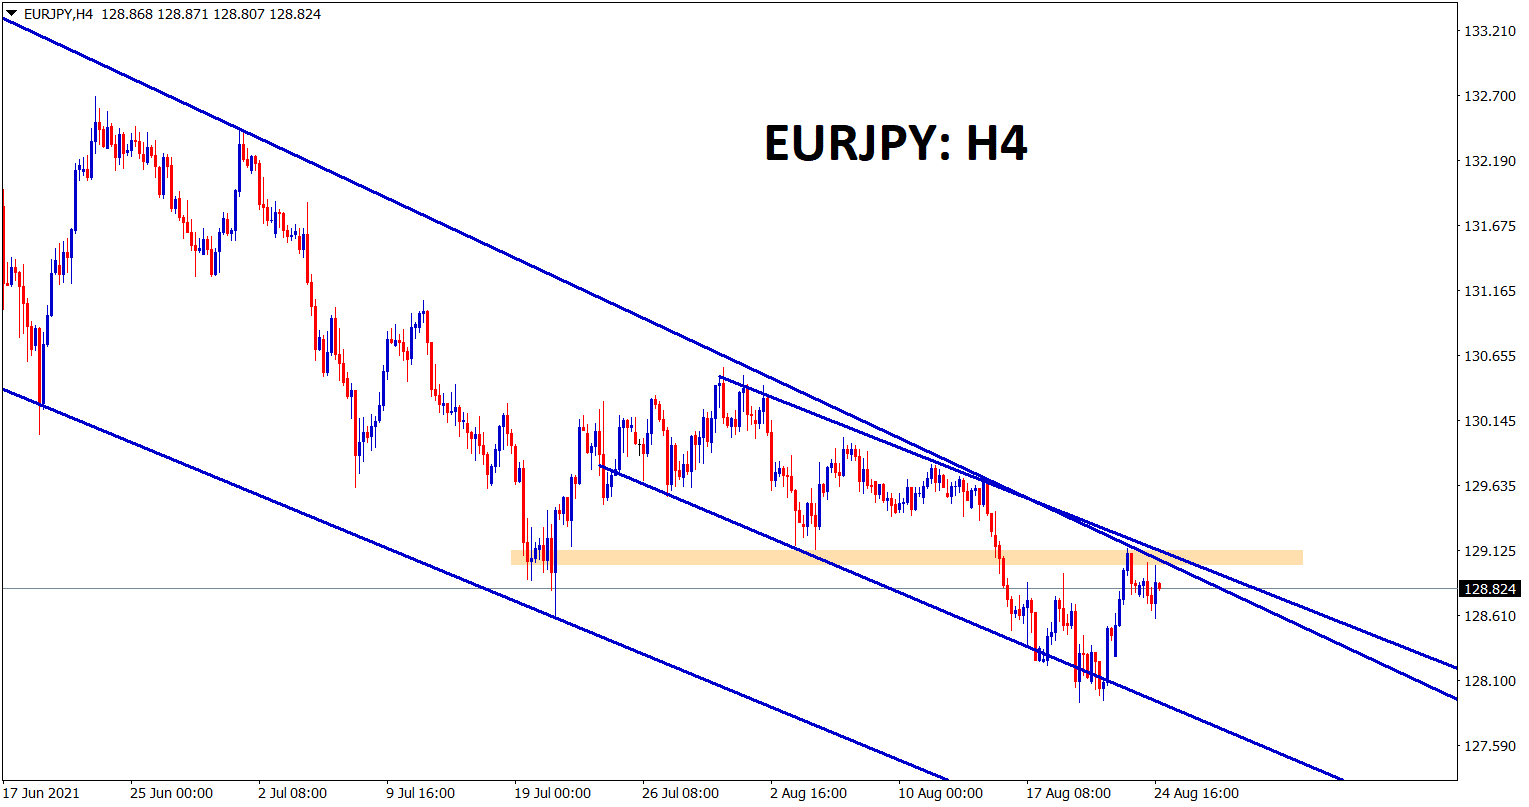 EURJPY hits the lower high level of the major and minor descending channel